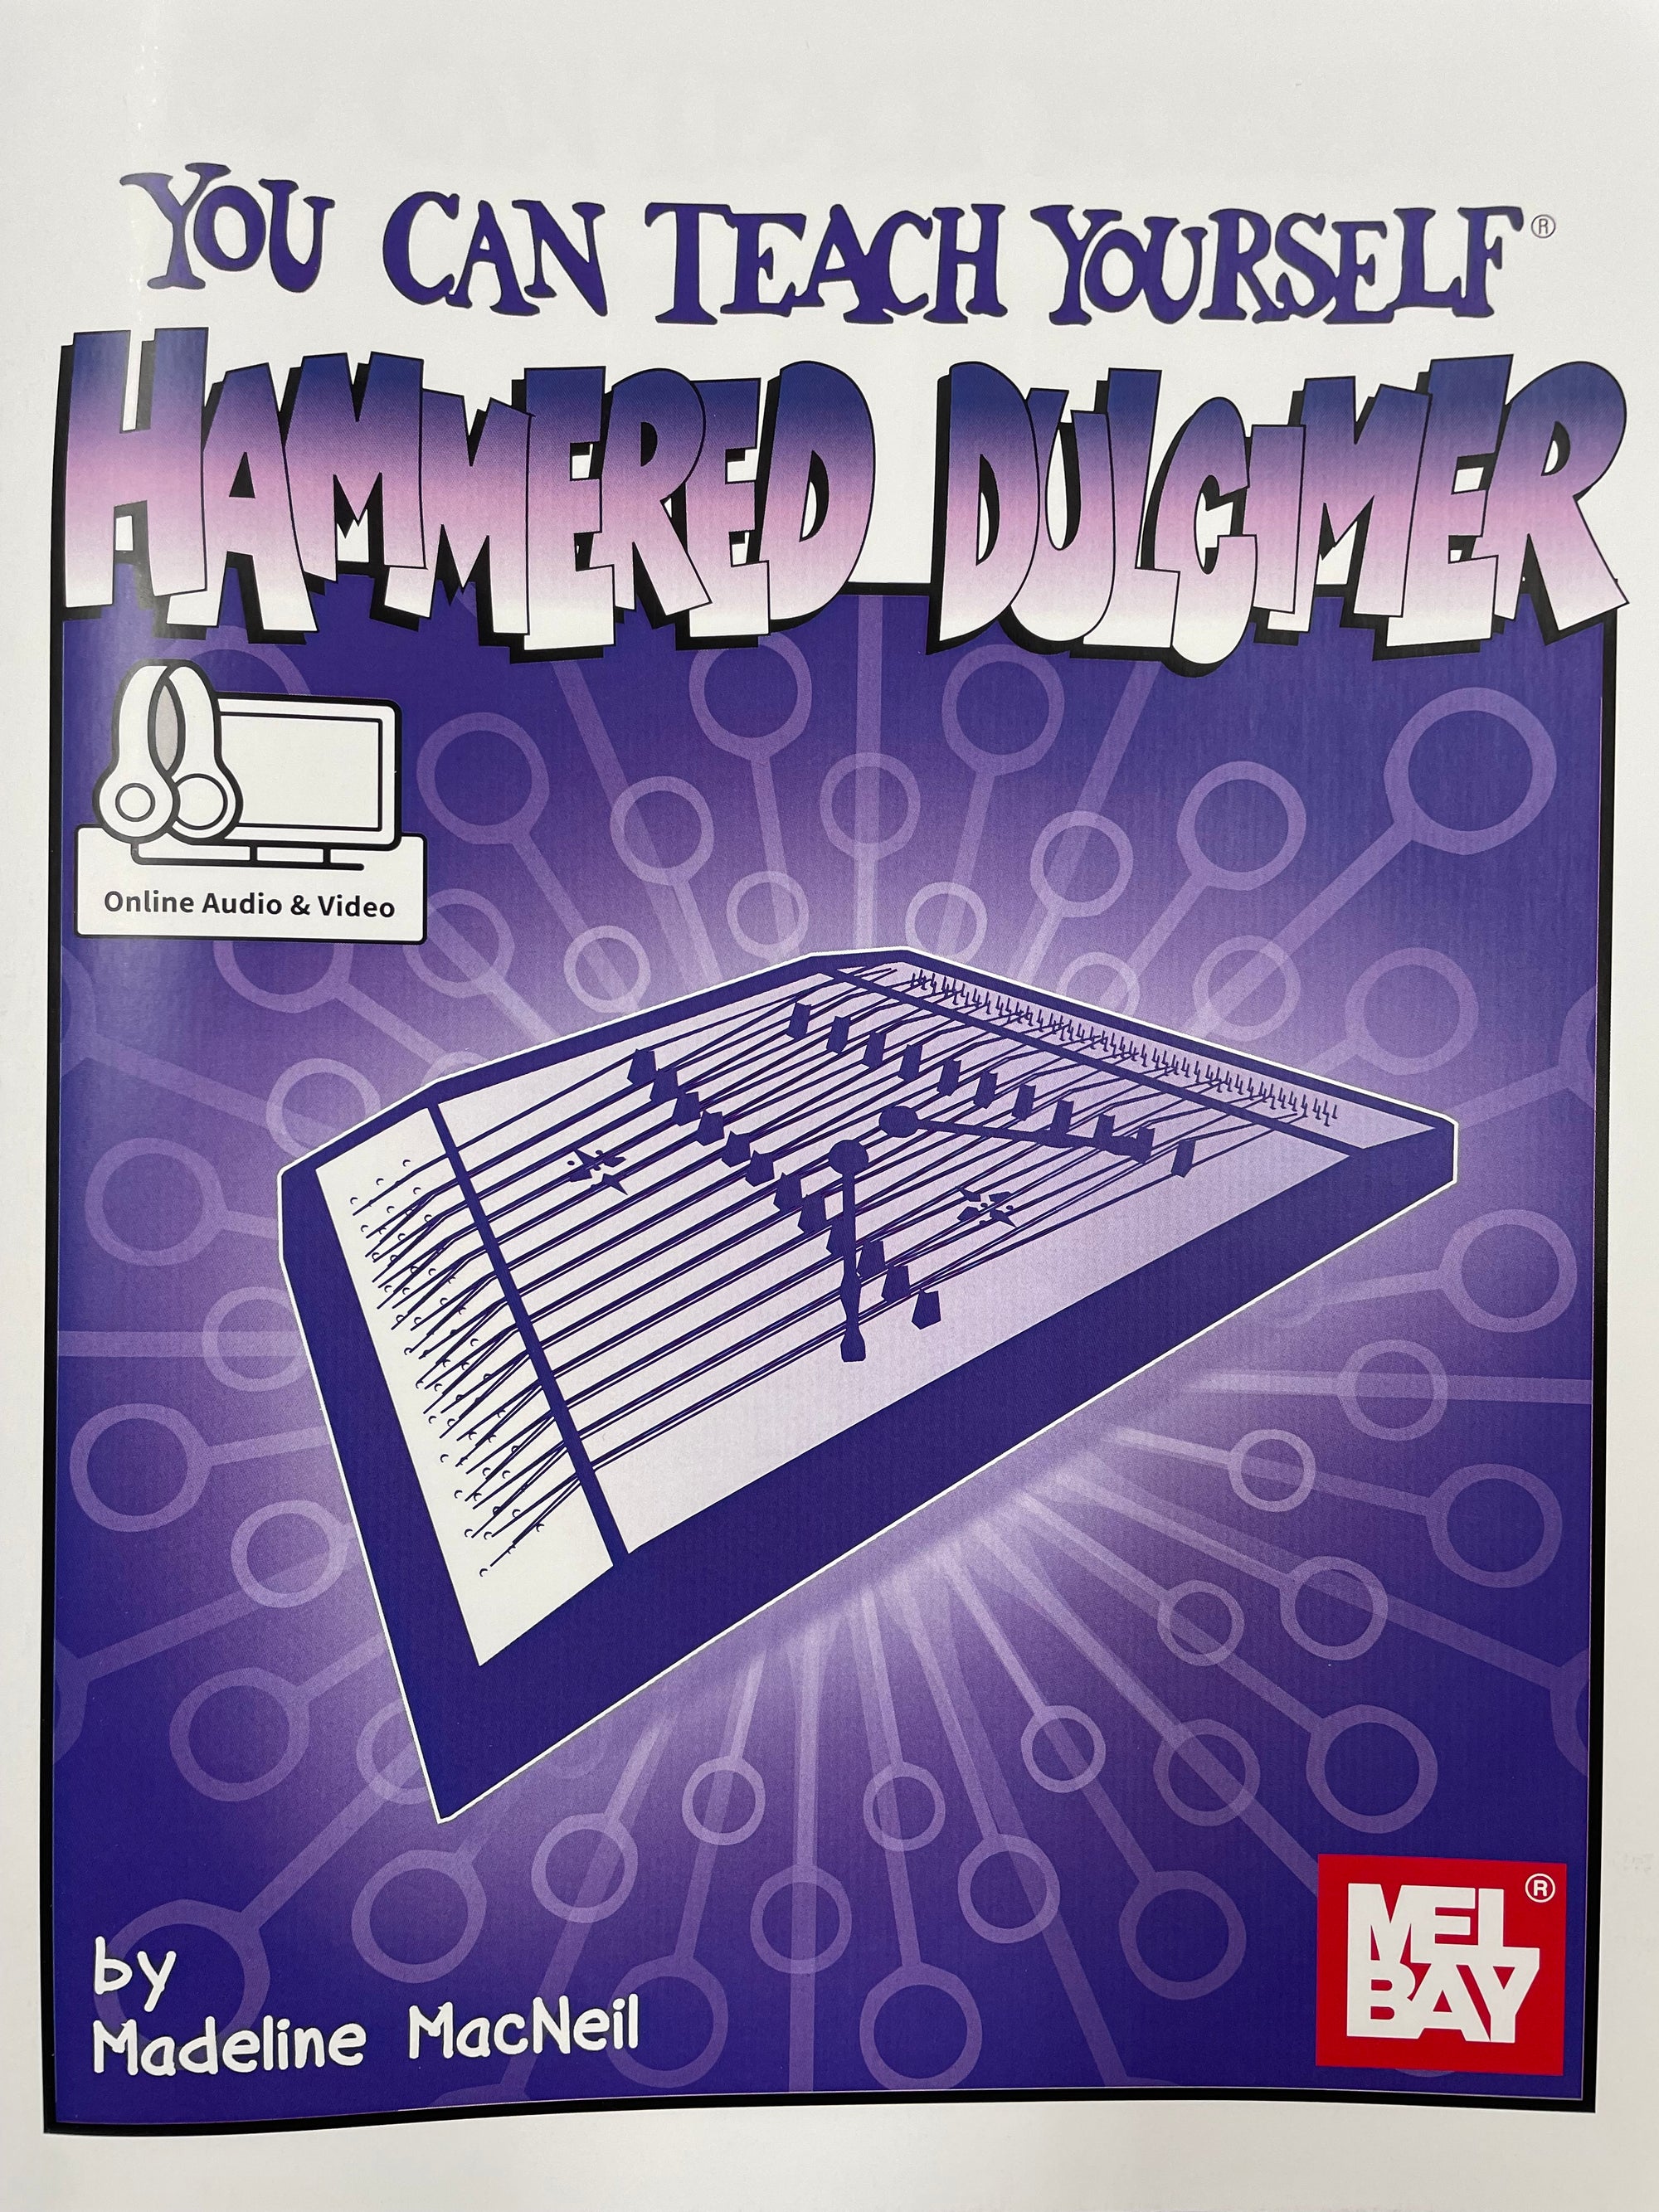 Book cover titled "You Can Teach Yourself Hammered Dulcimer" by Madeline MacNeil, featuring a graphic of the You Can Teach Yourself Hammered Dulcimer on a purple background with spiral design.